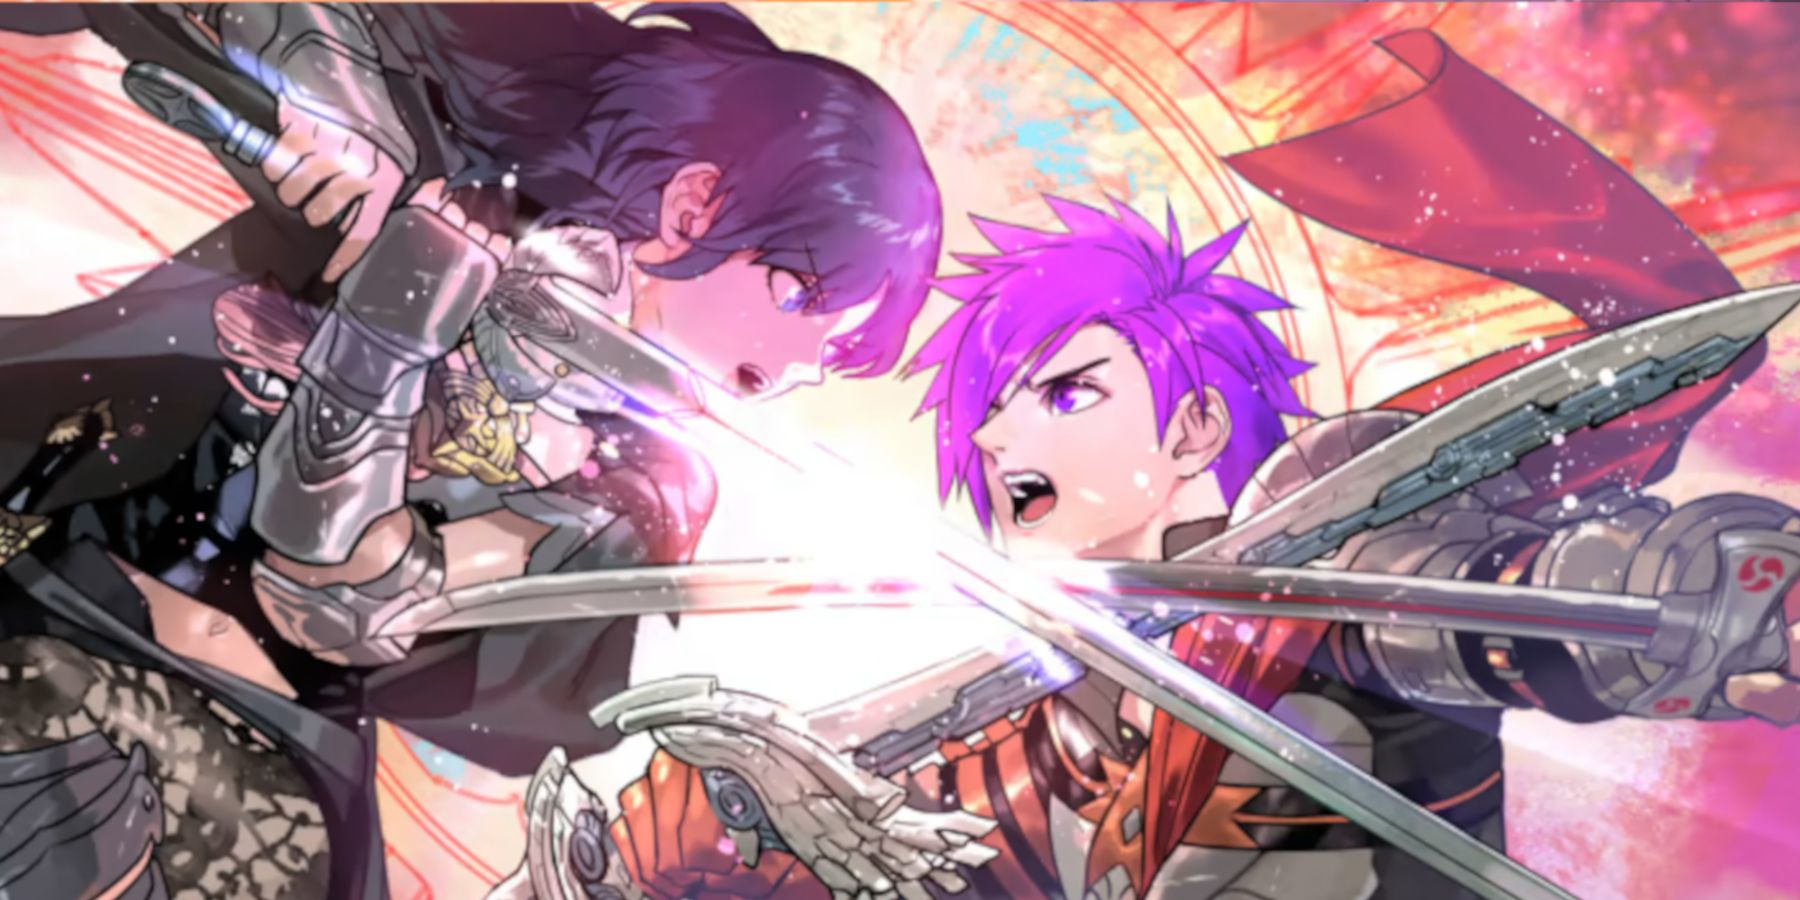 Byleth and a new character from Fire Emblem Warriors: Three Hopes clash swords together.